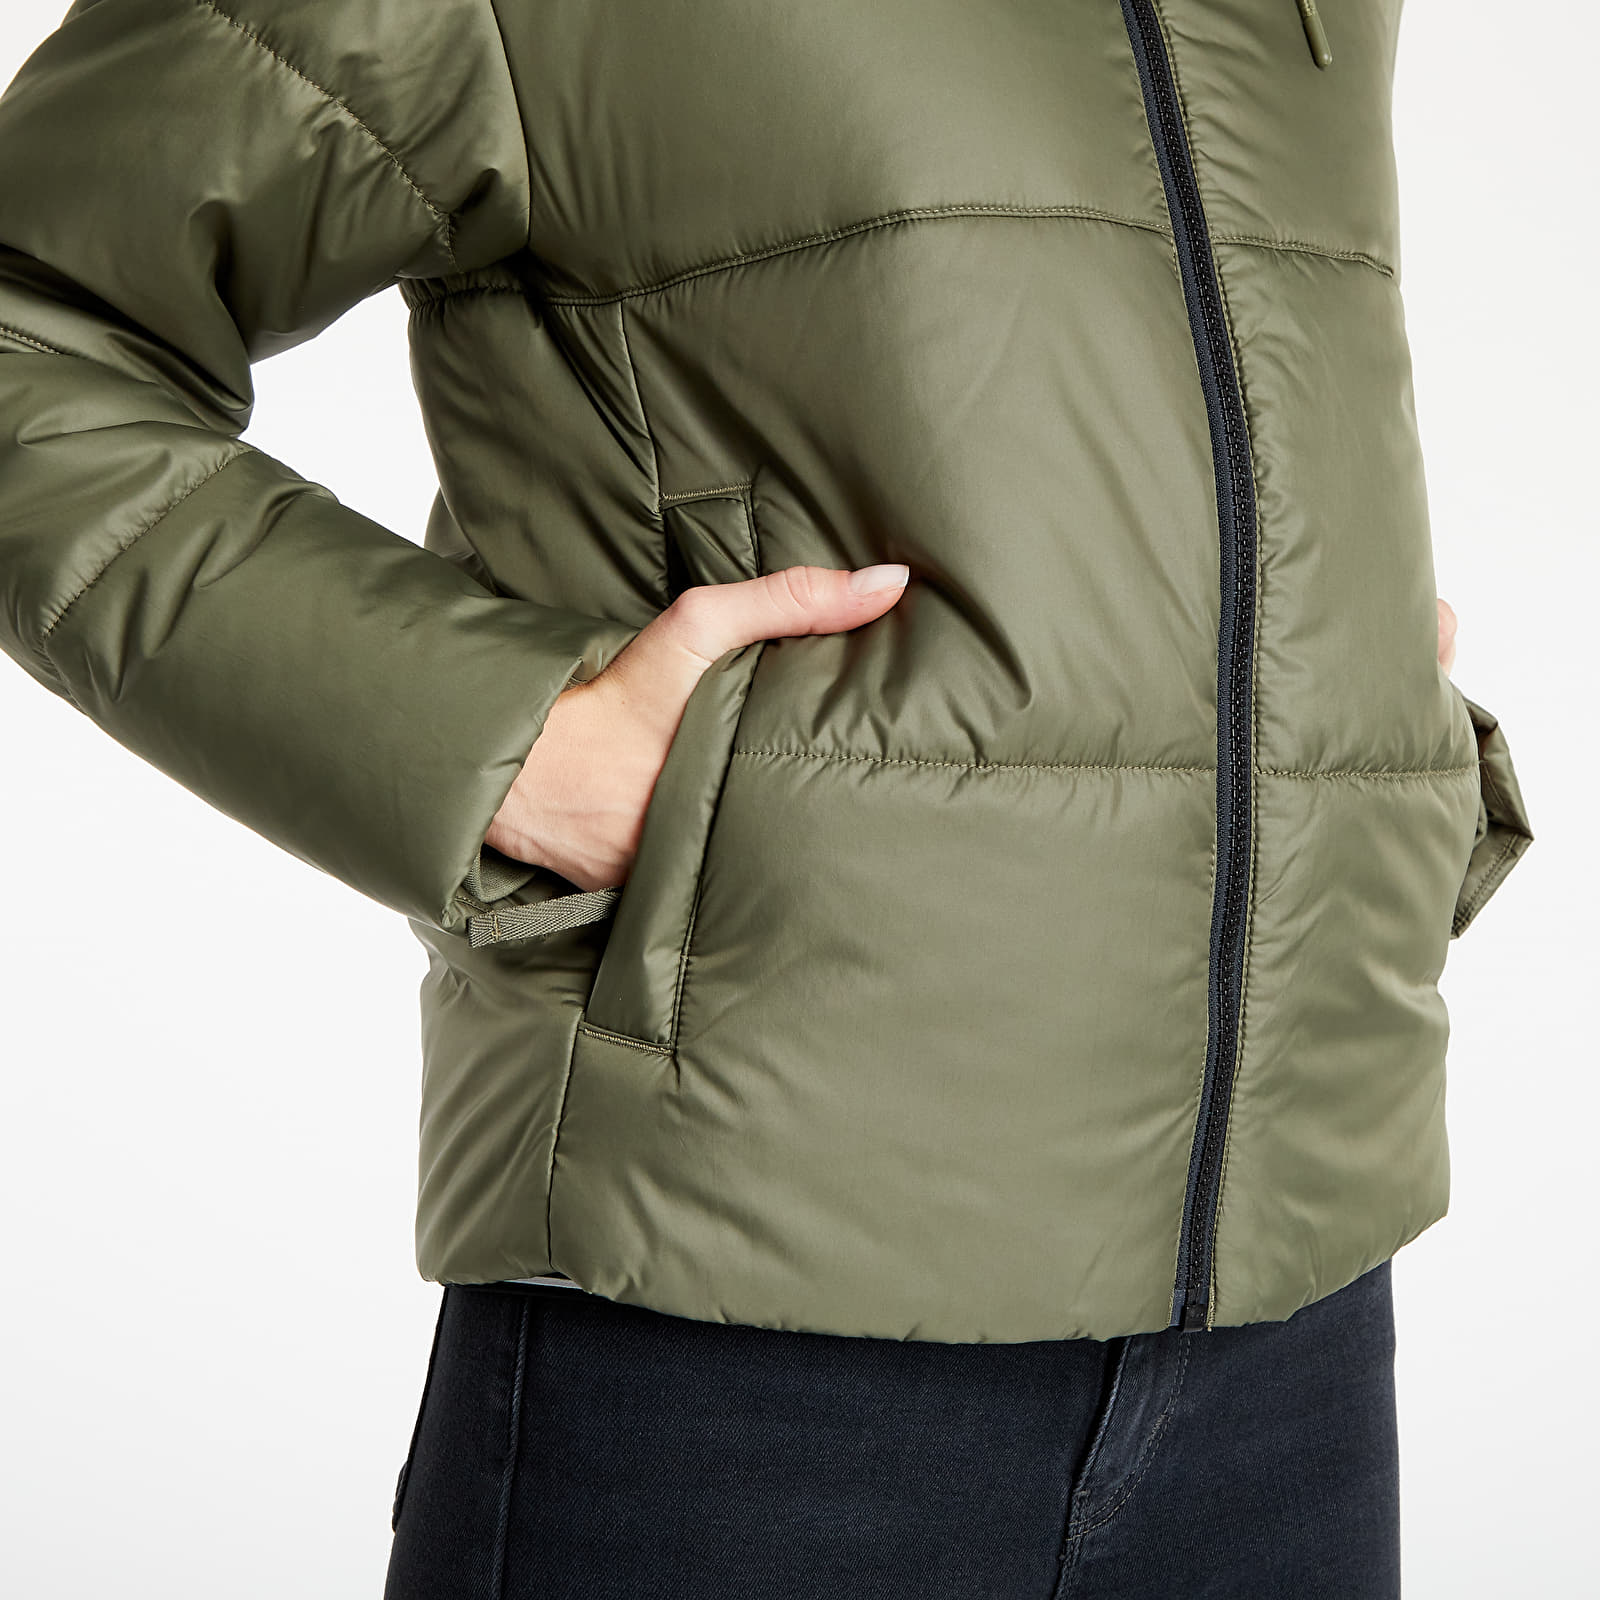 Nike Winter Jacket NSW Therma-FIT Repel - Medium Olive/White Women